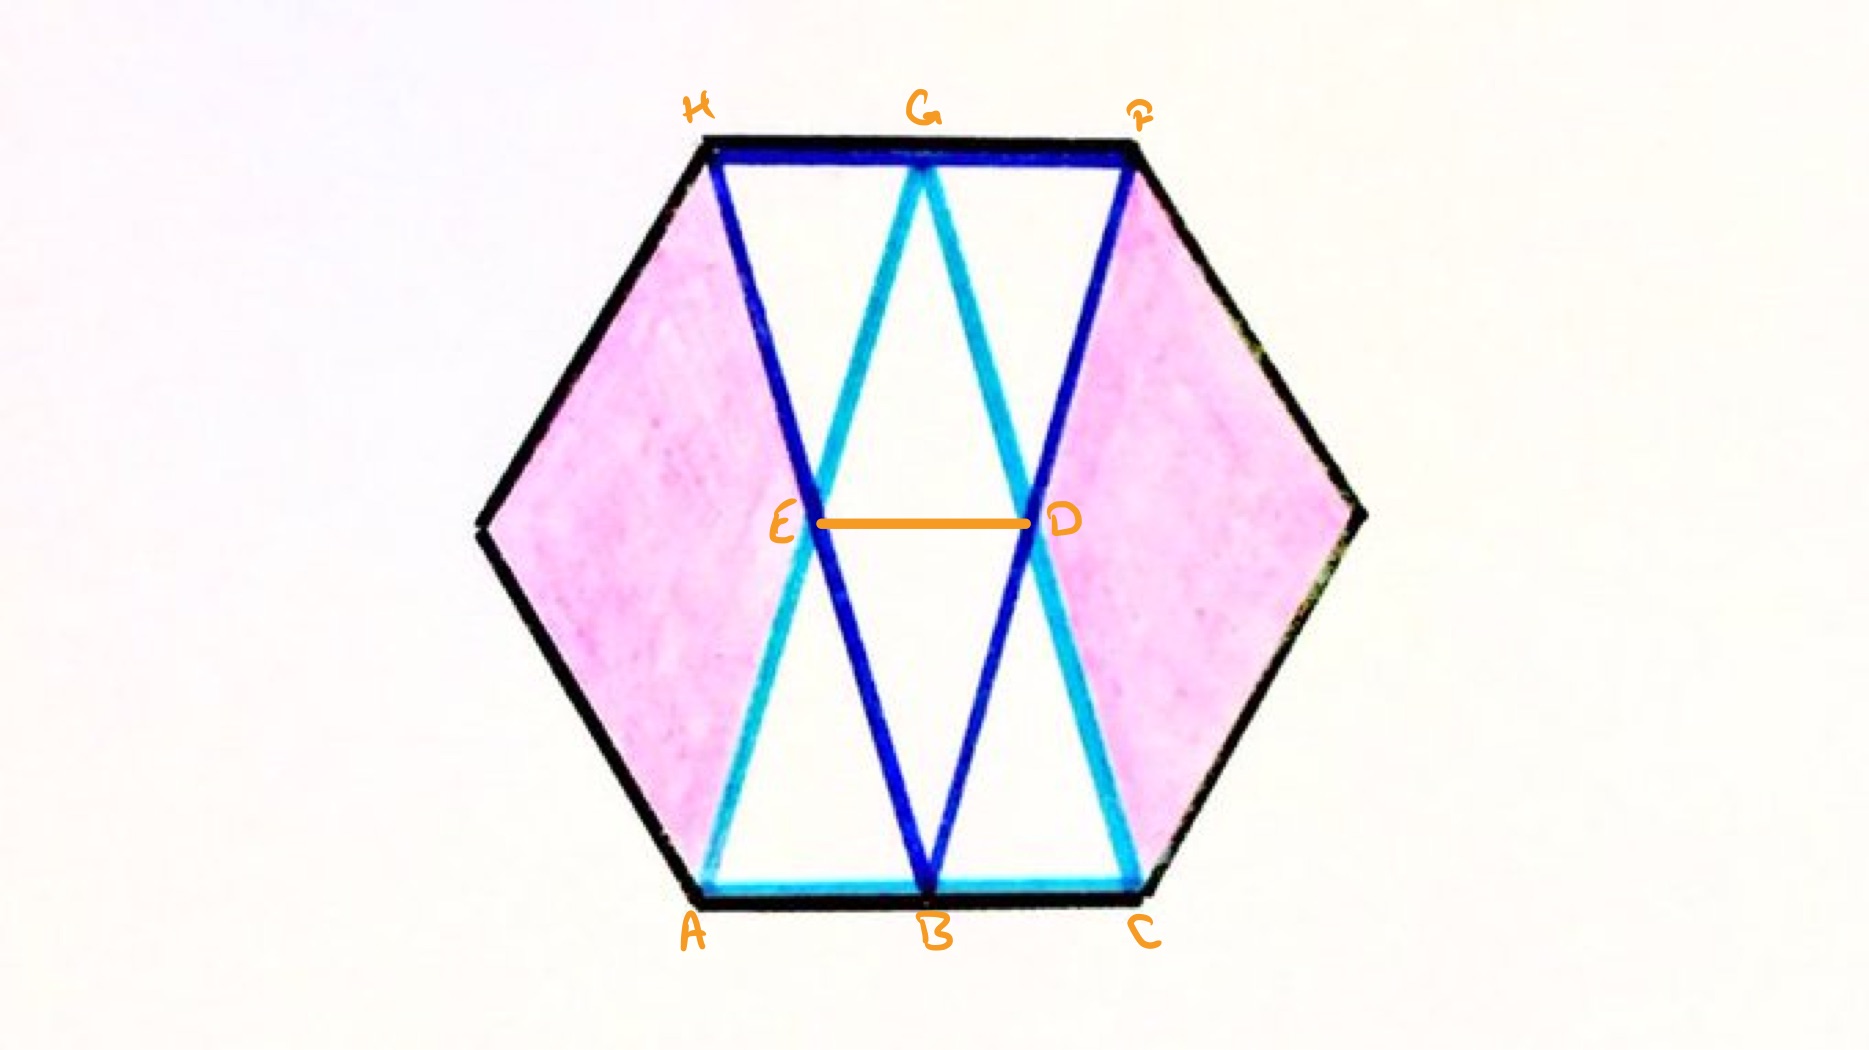 Dissected hexagon labelled